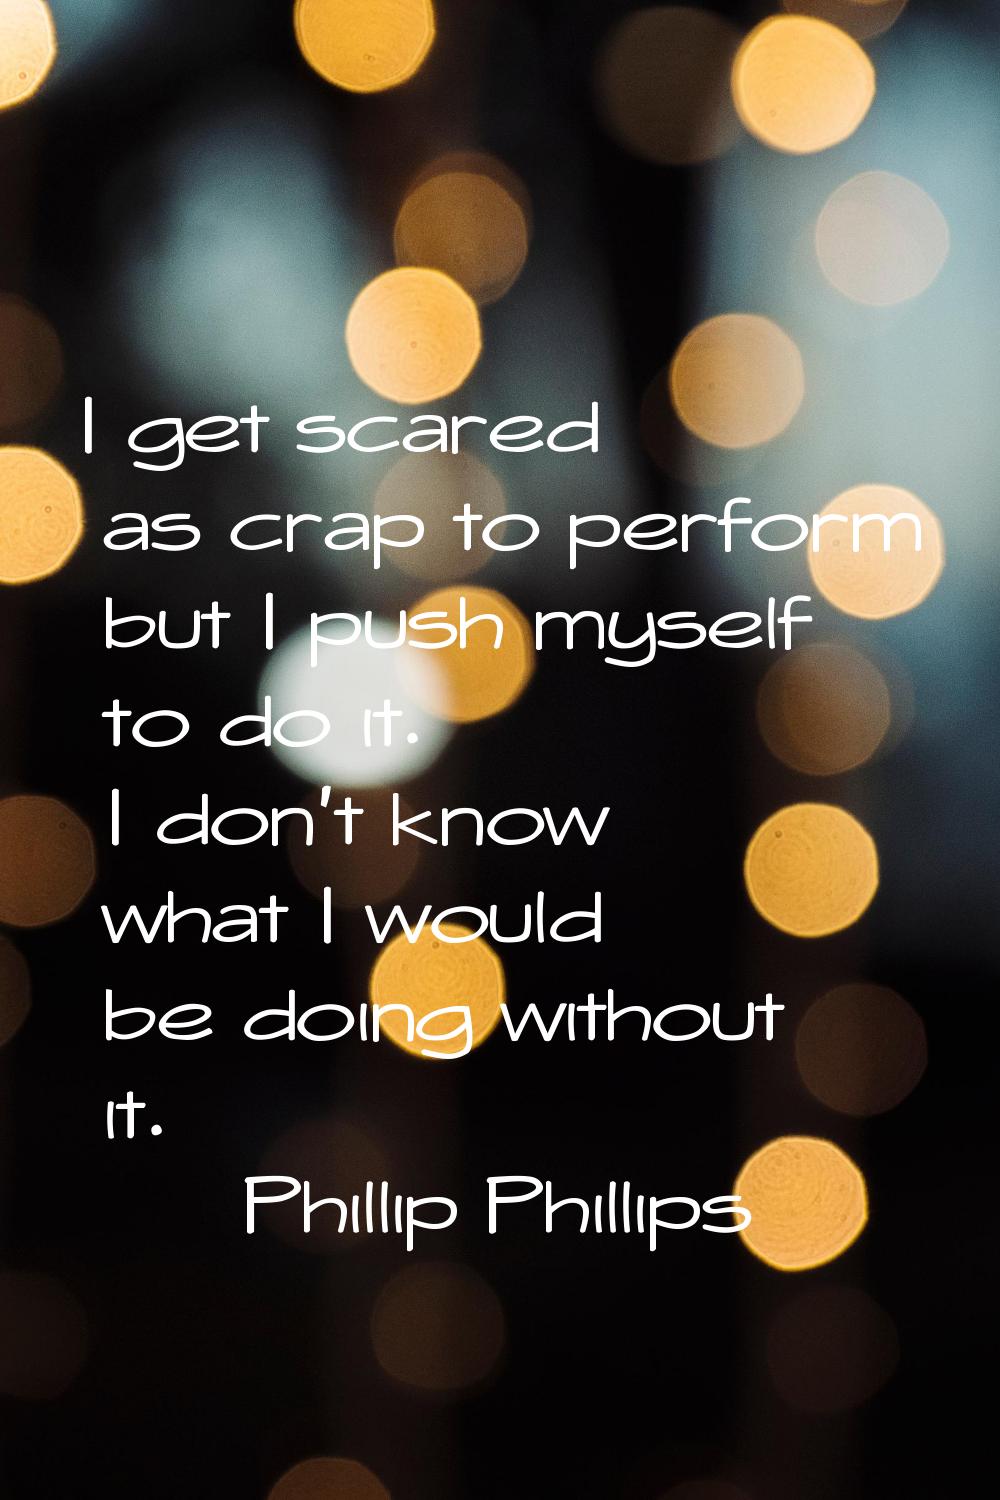 I get scared as crap to perform but I push myself to do it. I don't know what I would be doing with